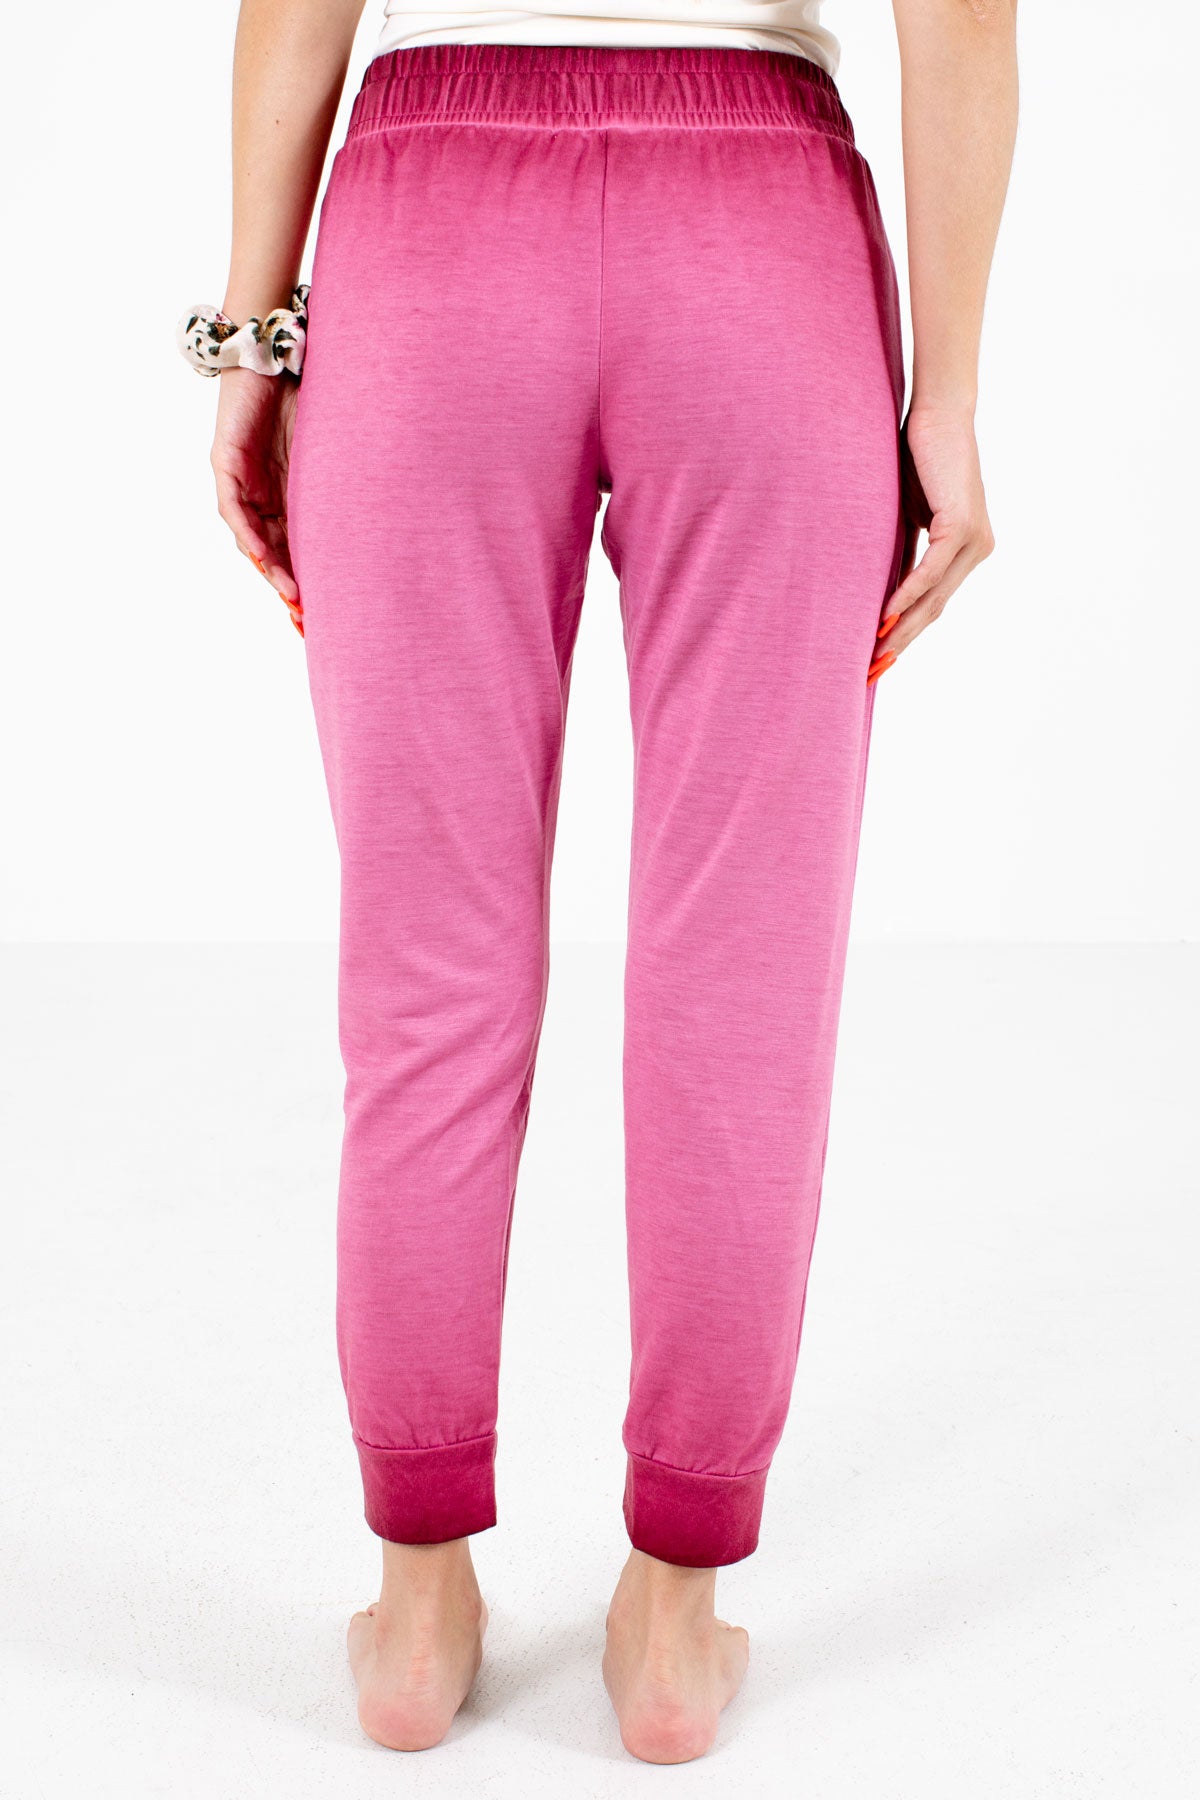 Women's Pink Boutique Lounge Pants with Pockets